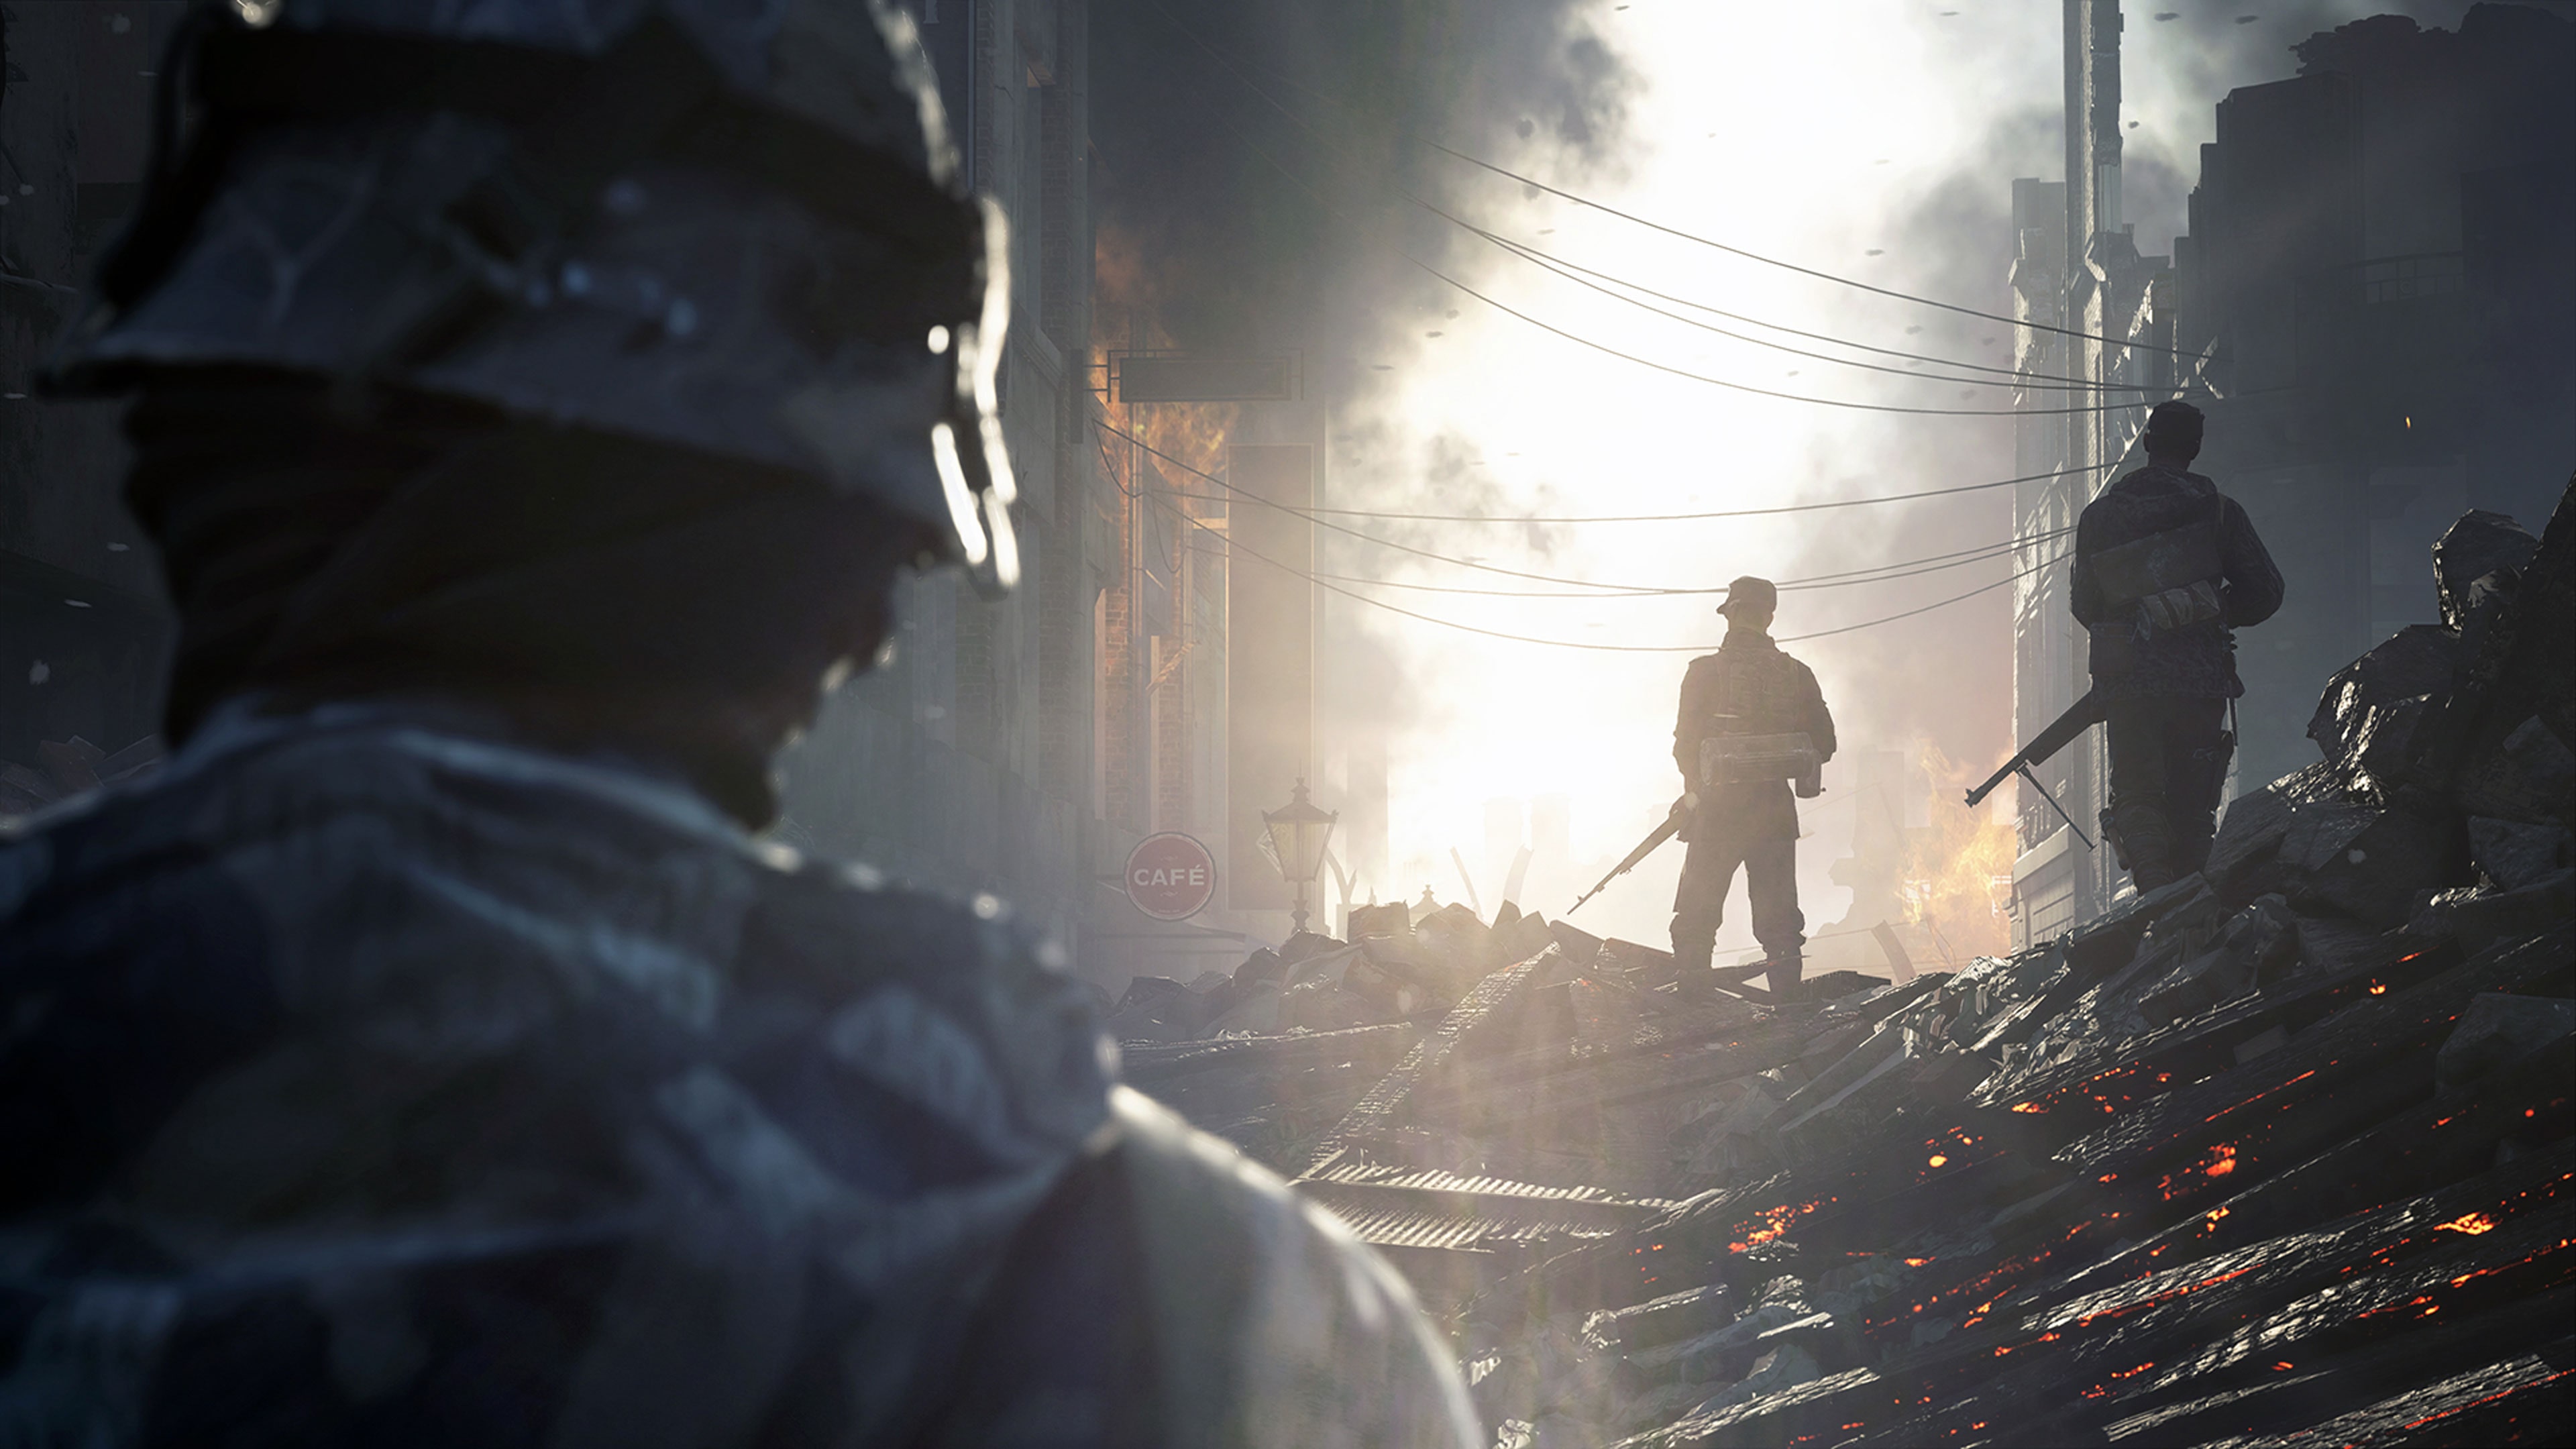 Battlefield V Definitive Edition download the last version for android